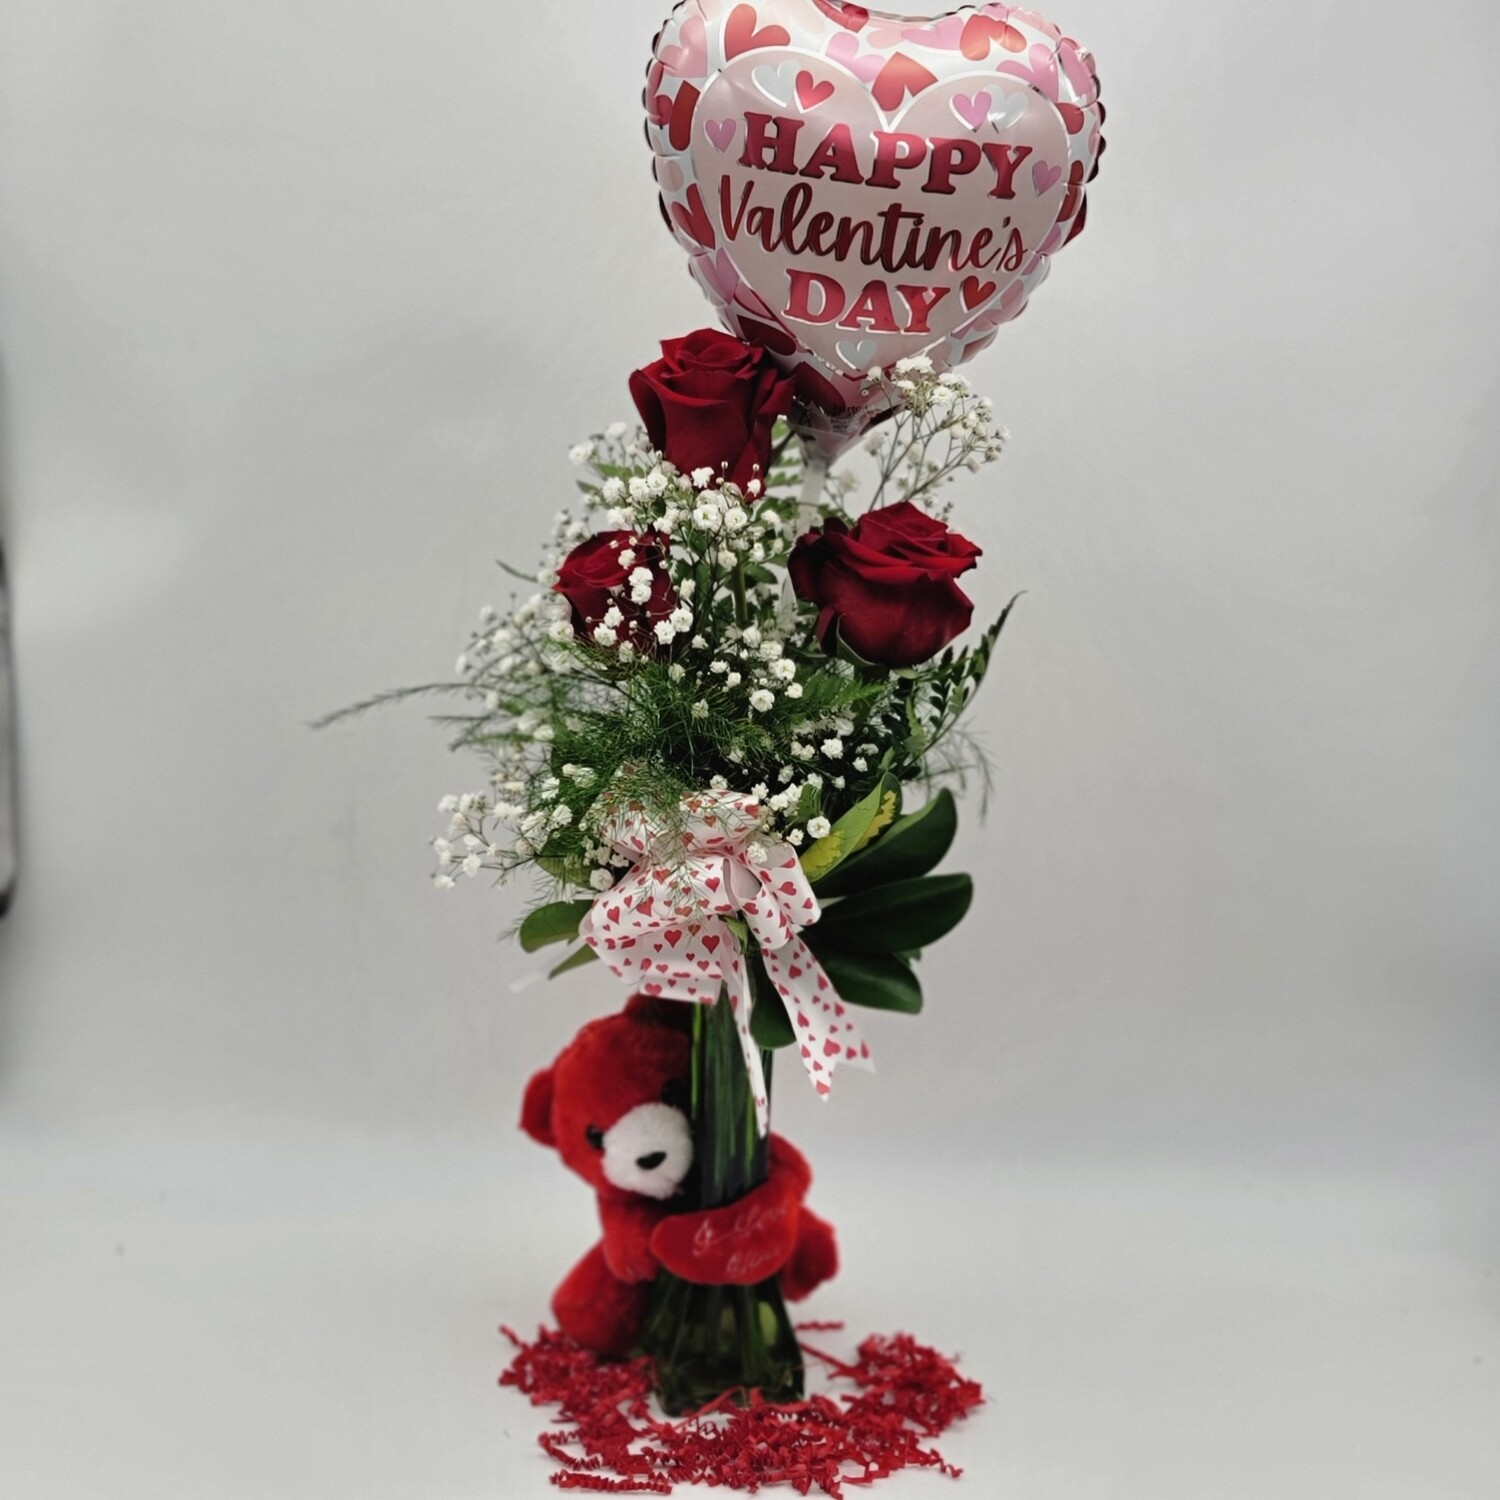 3 Roses in a vase, 1 balloon,  small  teddy